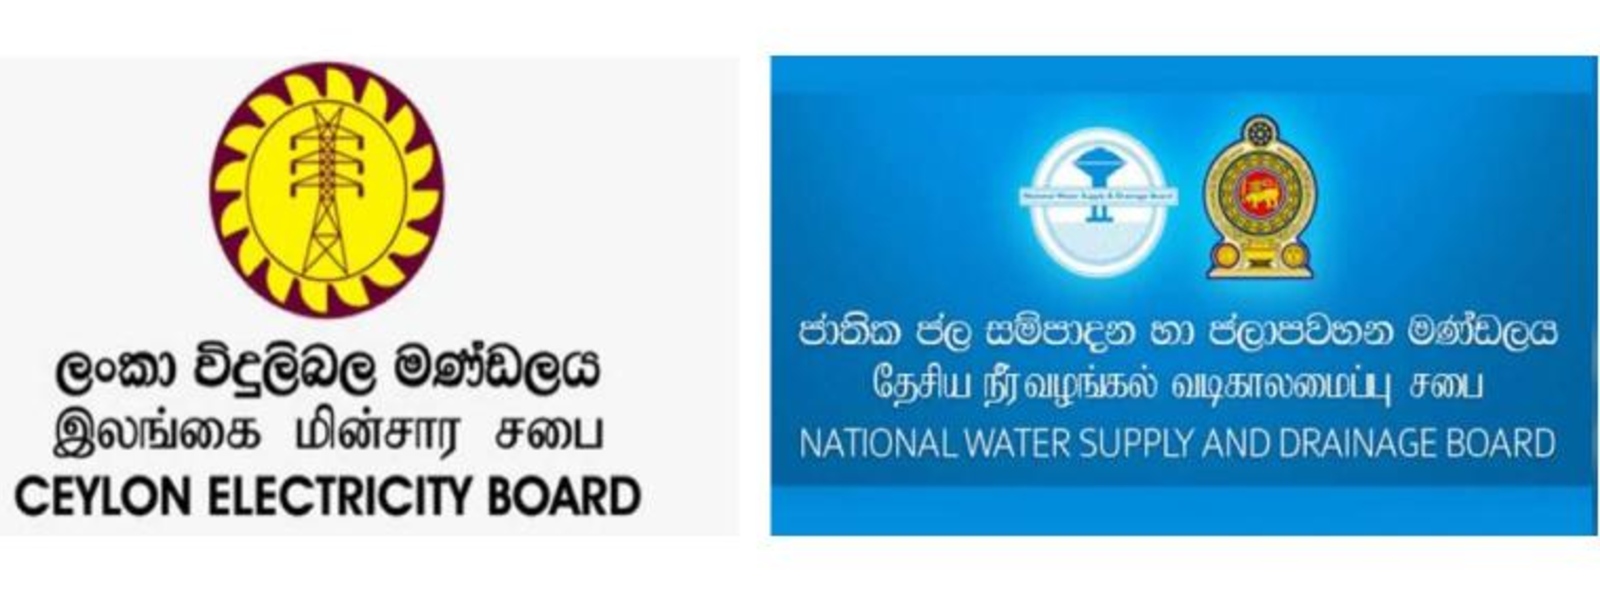 NWSDB and CEB will not suspend services in isolated areas due to delayed payments